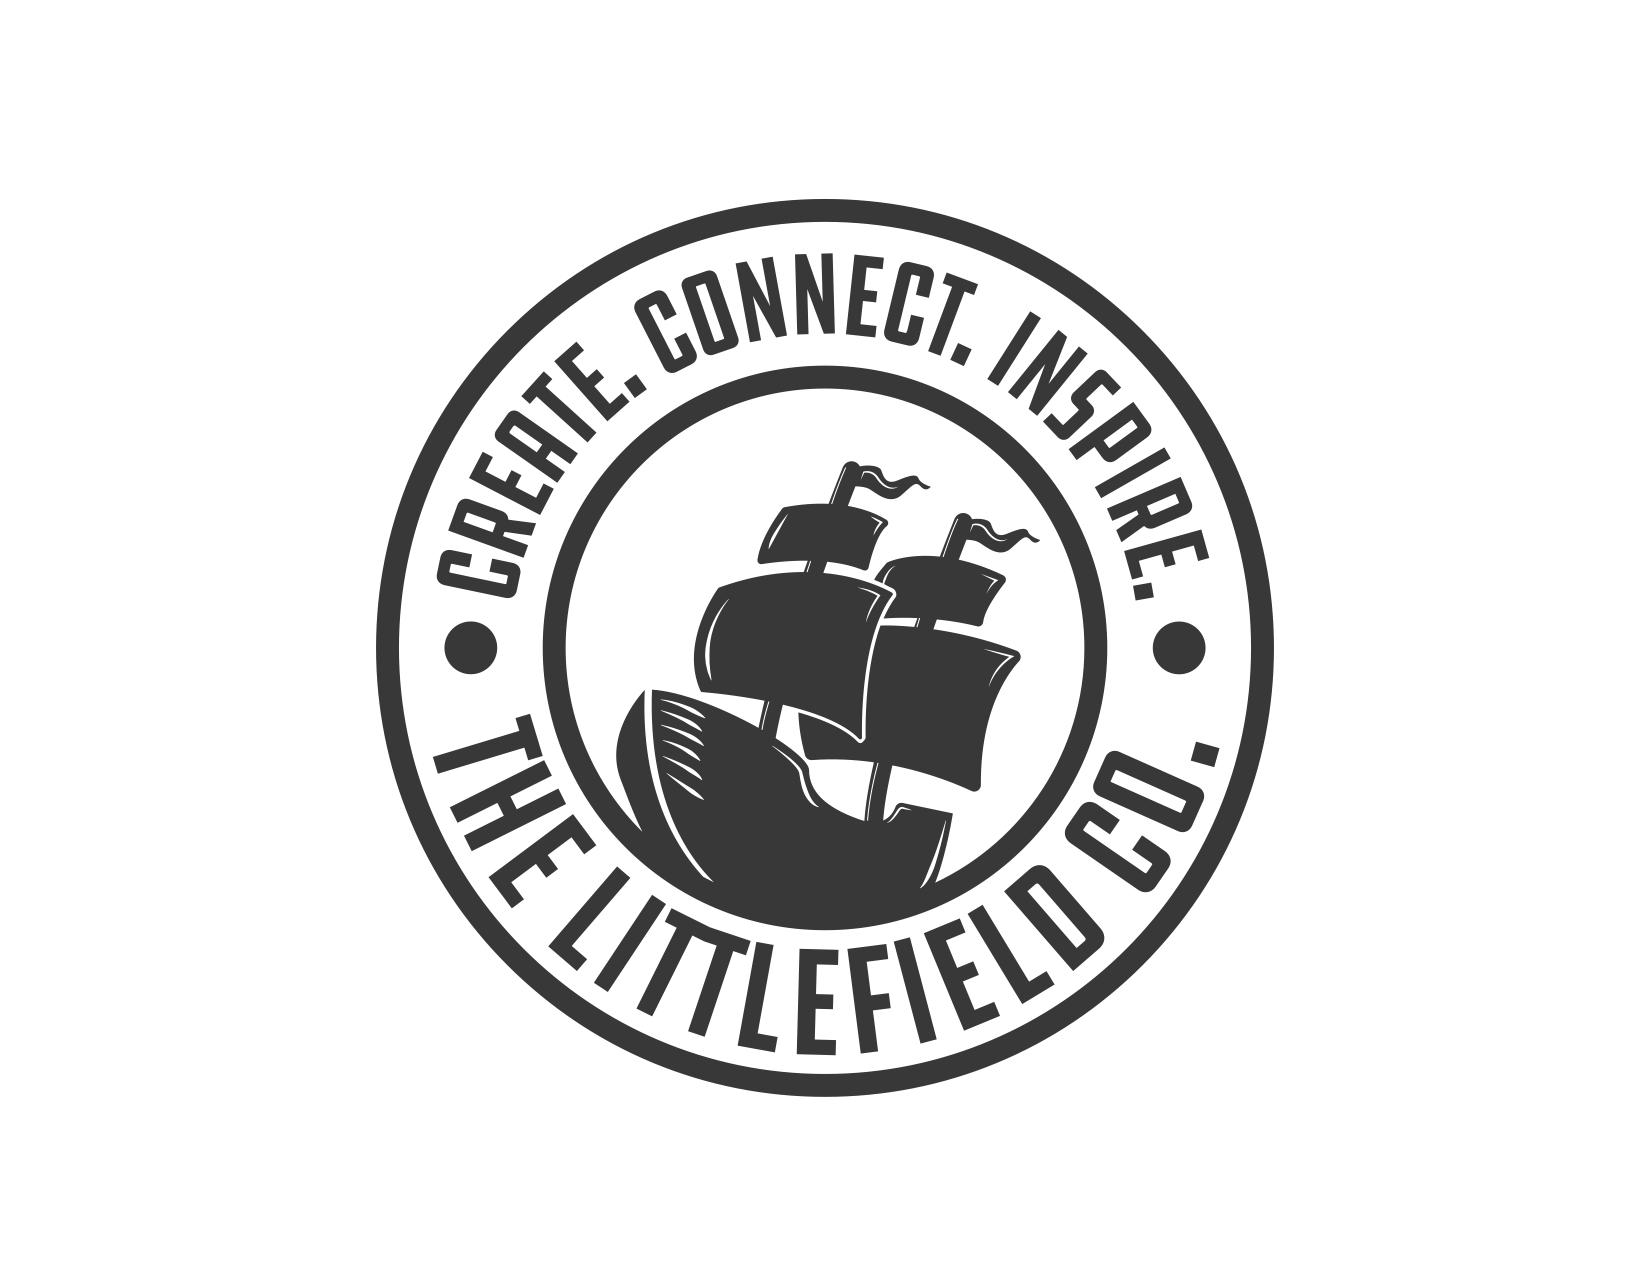 The Littlefield Company profile on Qualified.One